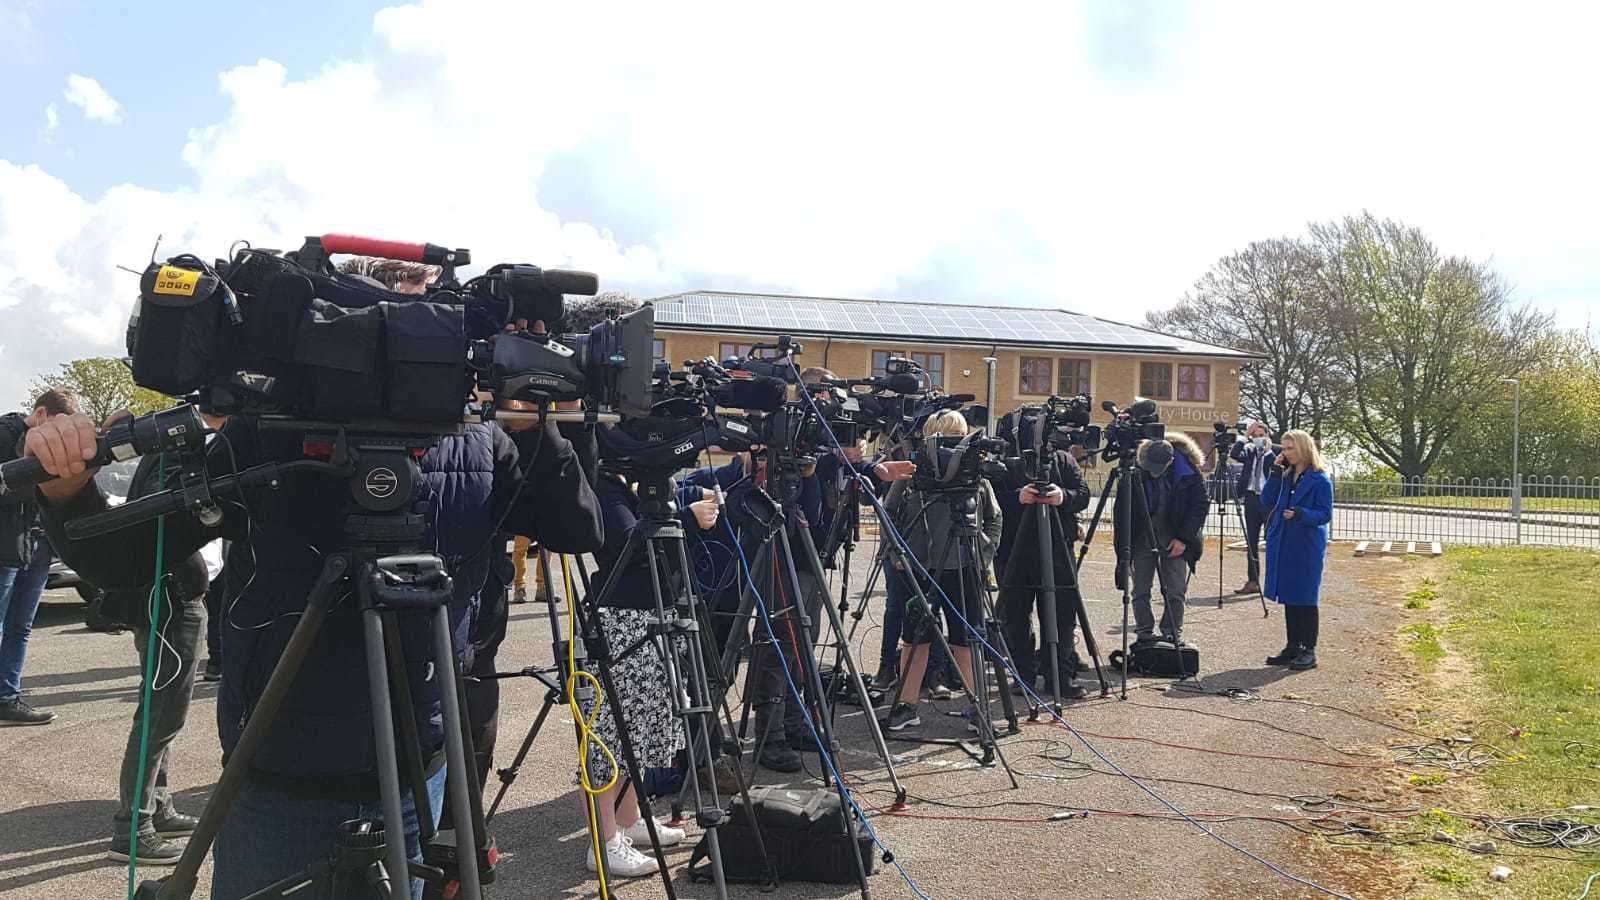 About 50 journalists are estimated to be at the press conference at the Aylesham community centre